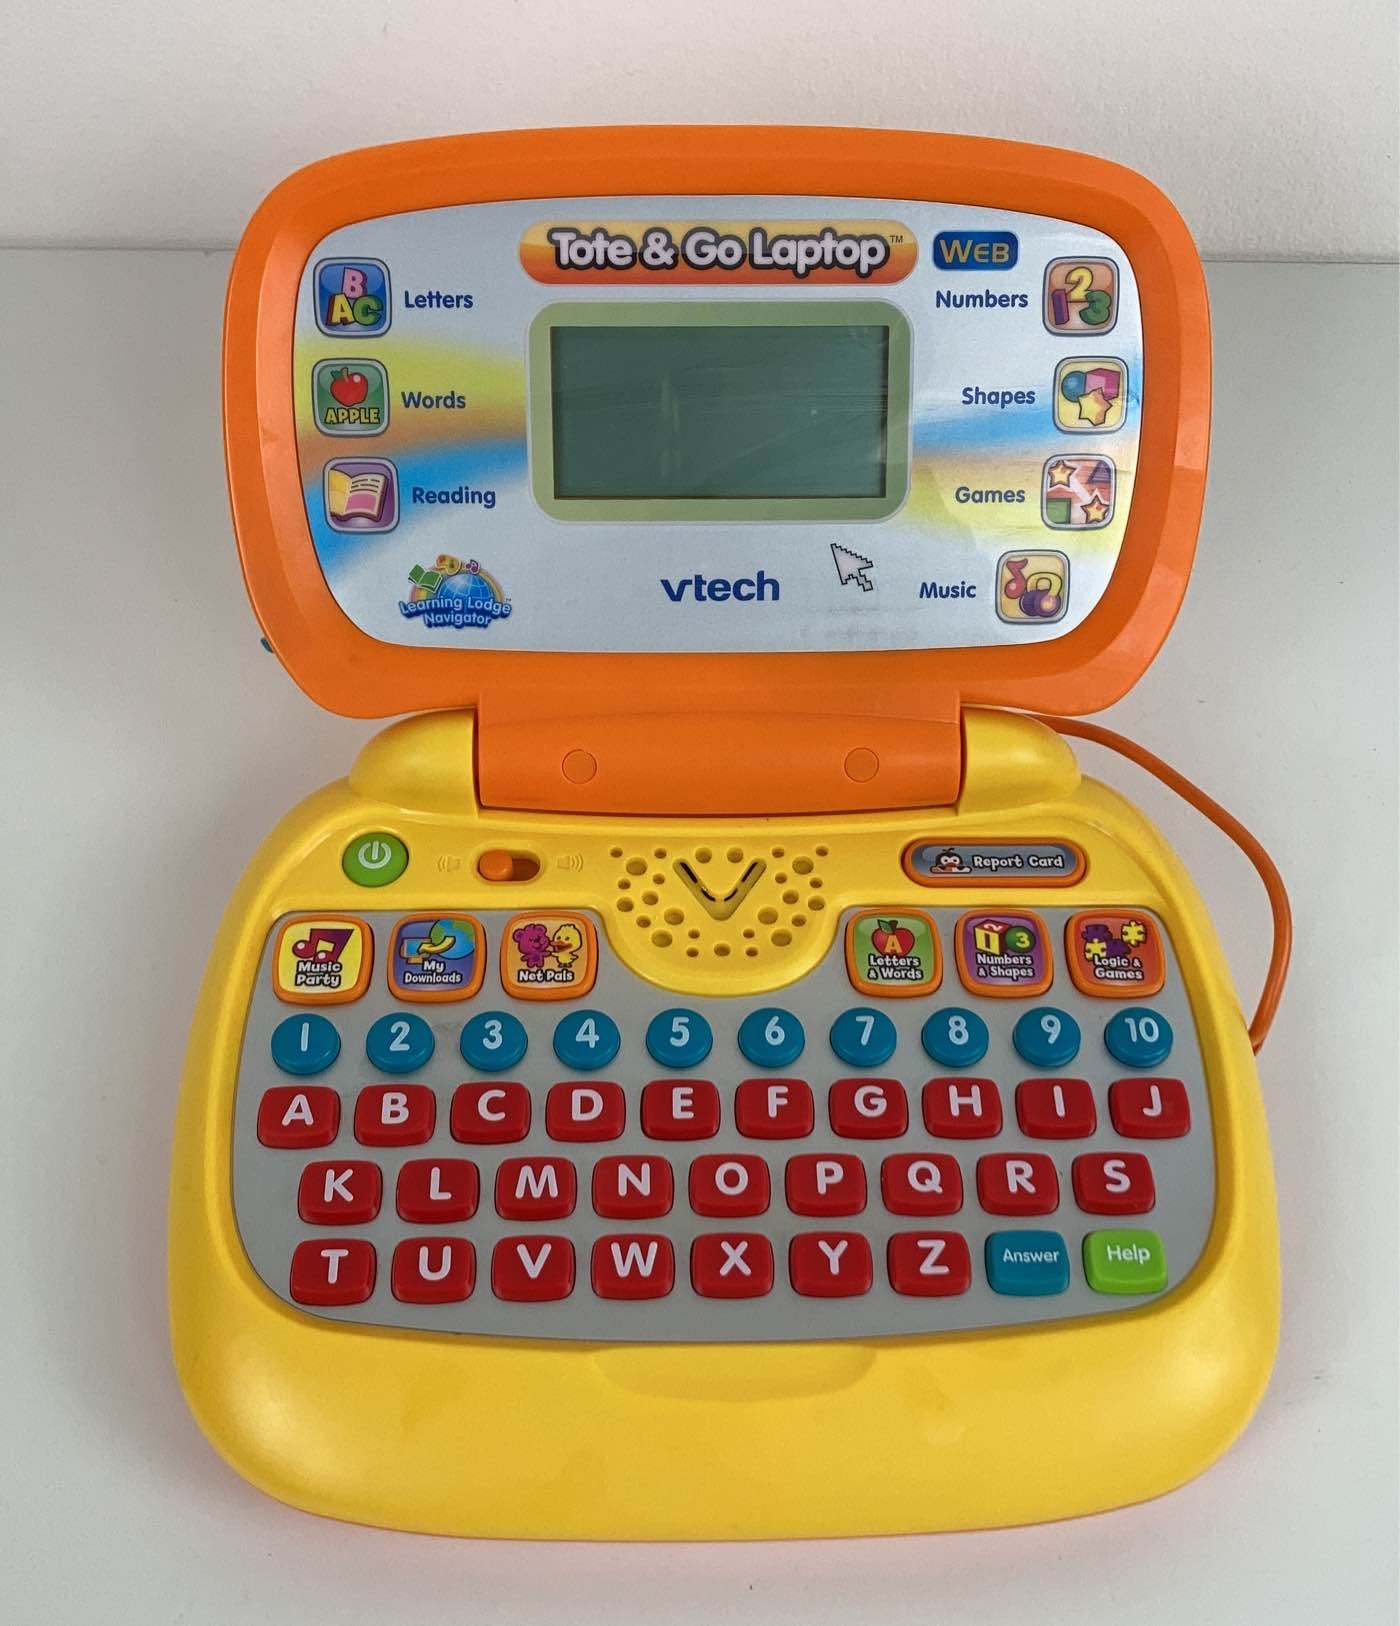 Vtech tote & Go laptop @950 lp900 Play just like the grown-ups and